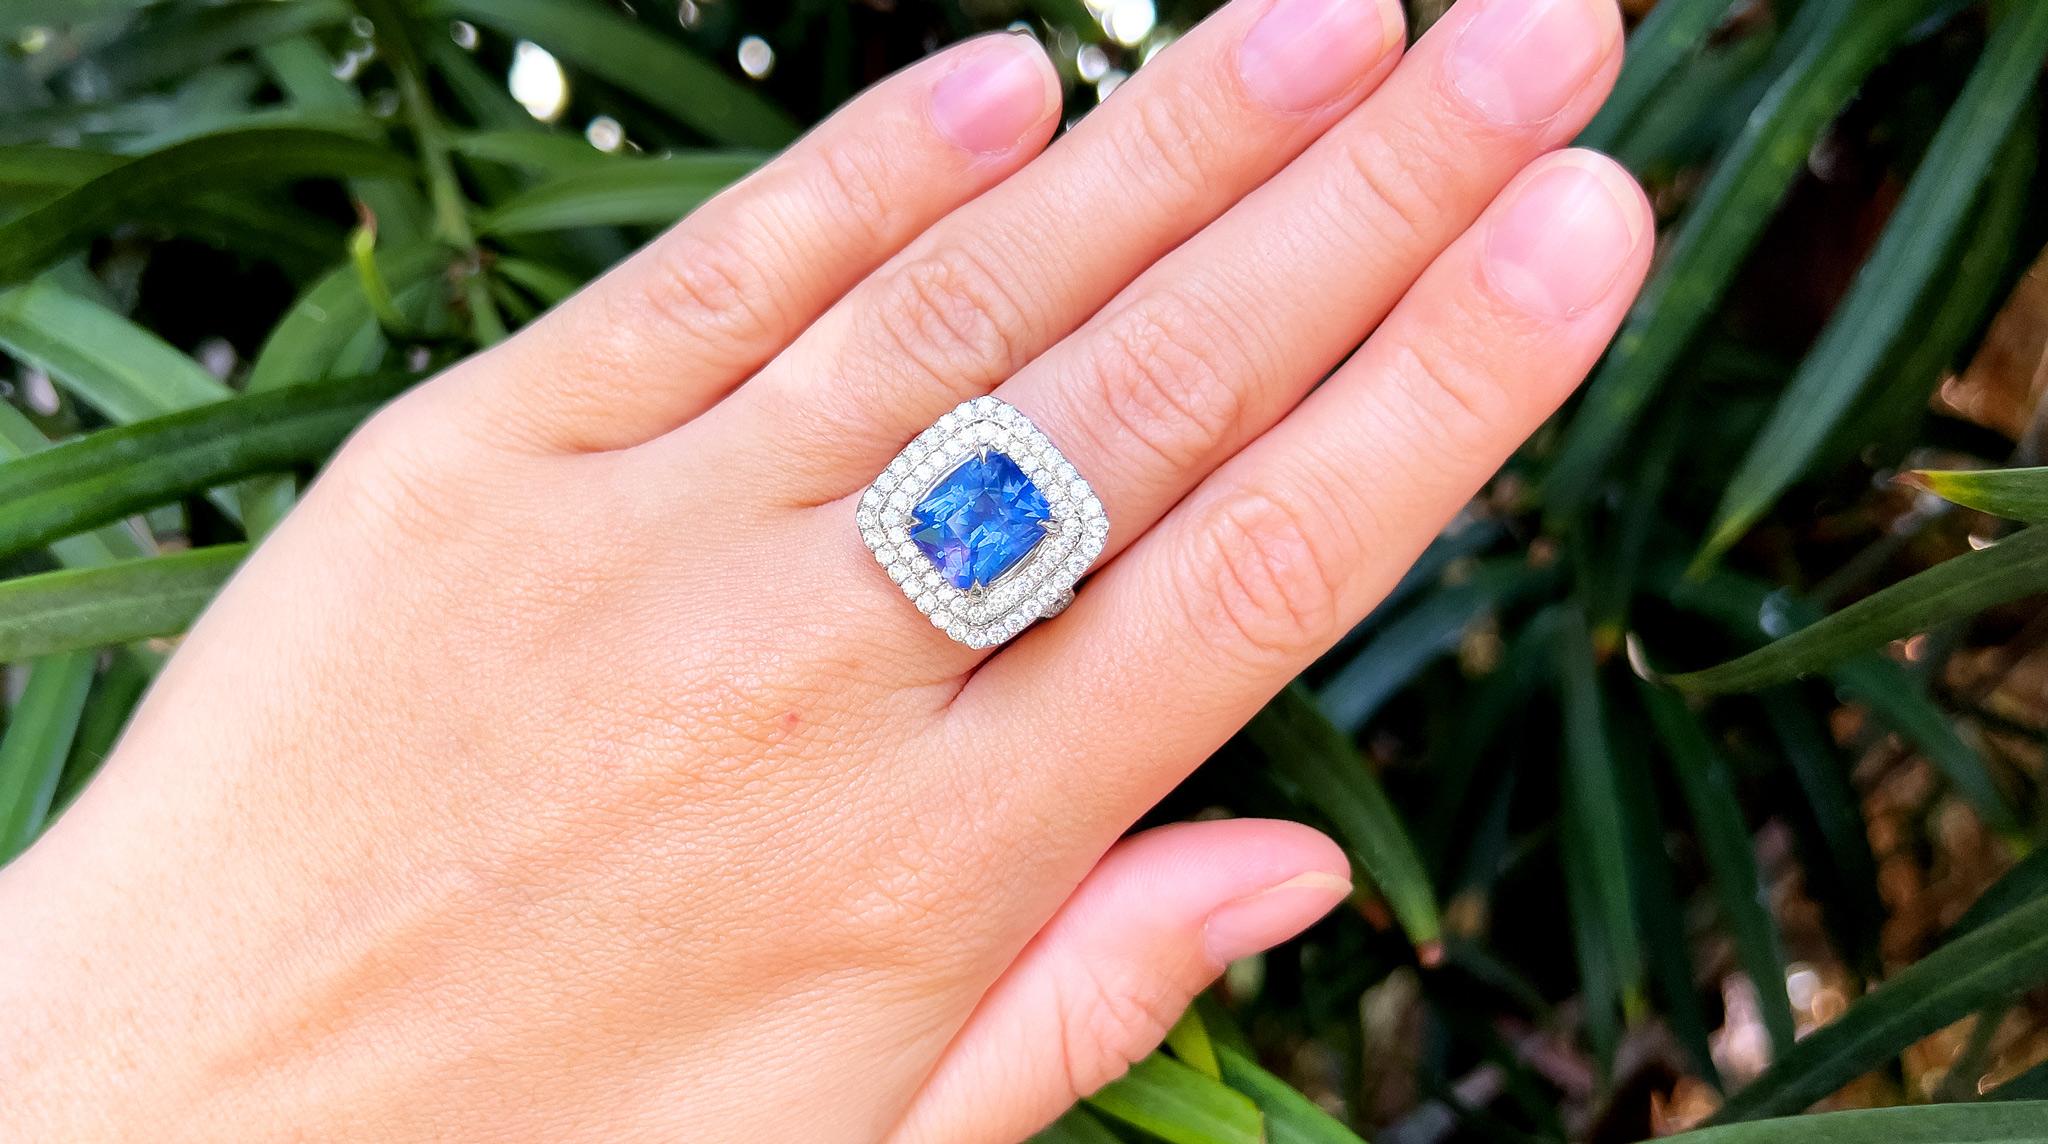 Ceylon Sapphire = 5.50 Carat
Diamonds = 1.30 Carats
( Color: F, Clarity: VS )
Metal: 18K Gold
Ring Size: 6.5 US
It can be resized complimentary